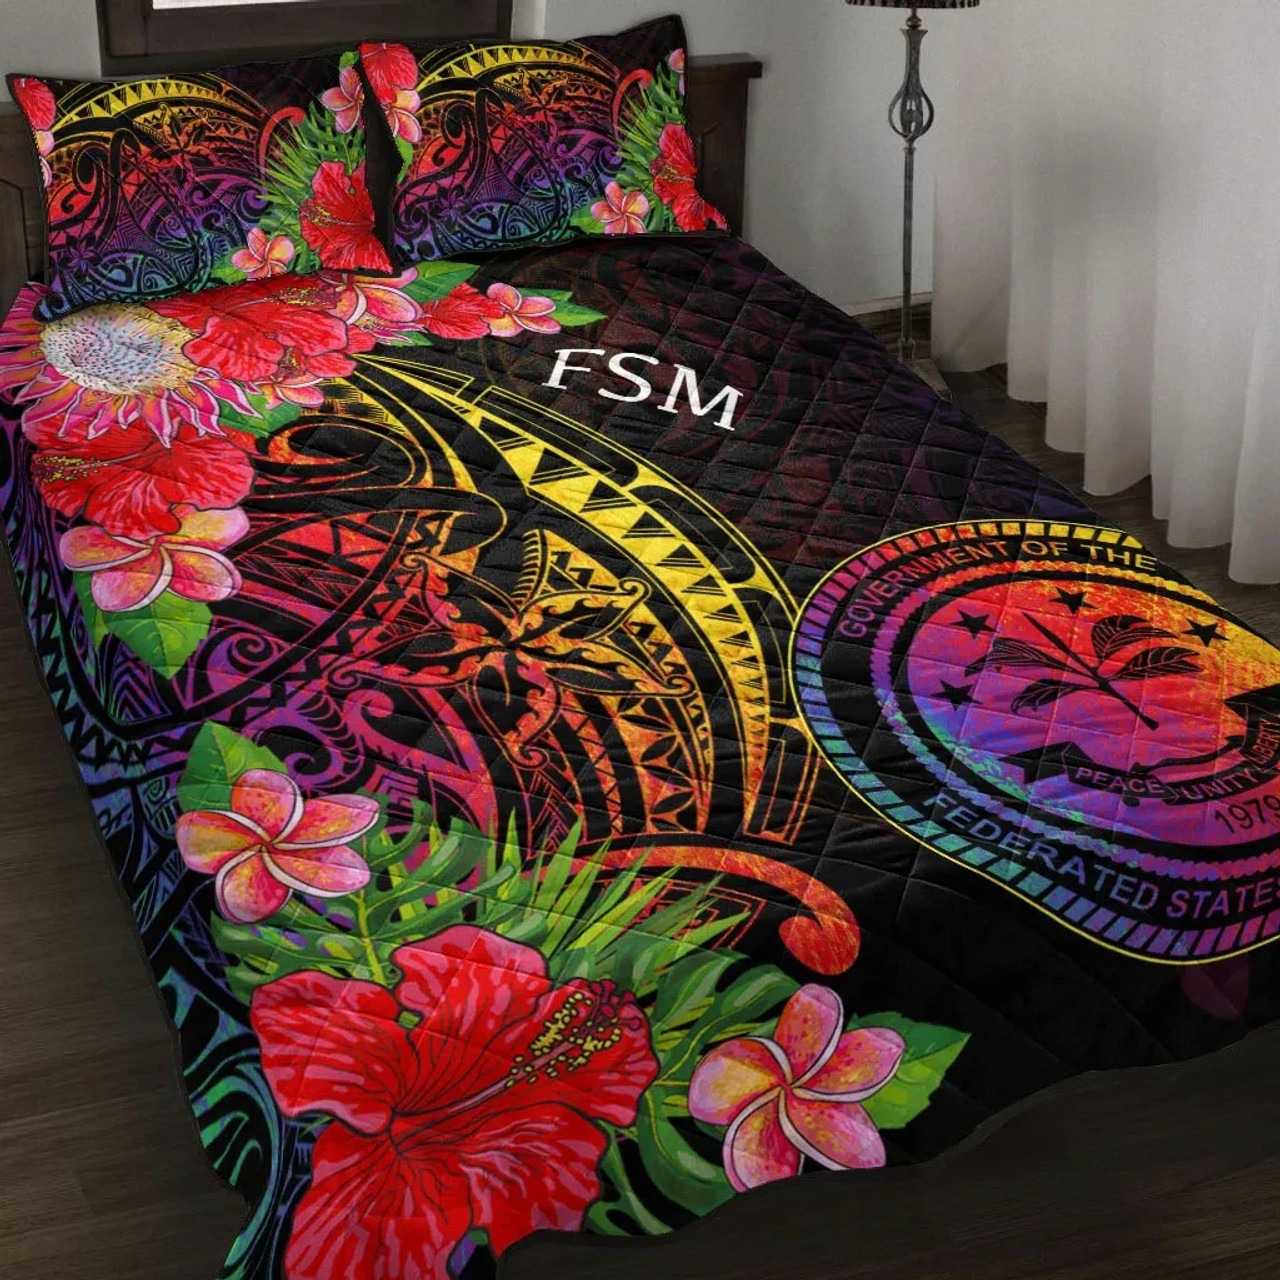 Federated States of Micronesia Quilt Bed Set - Tropical Hippie Style 1